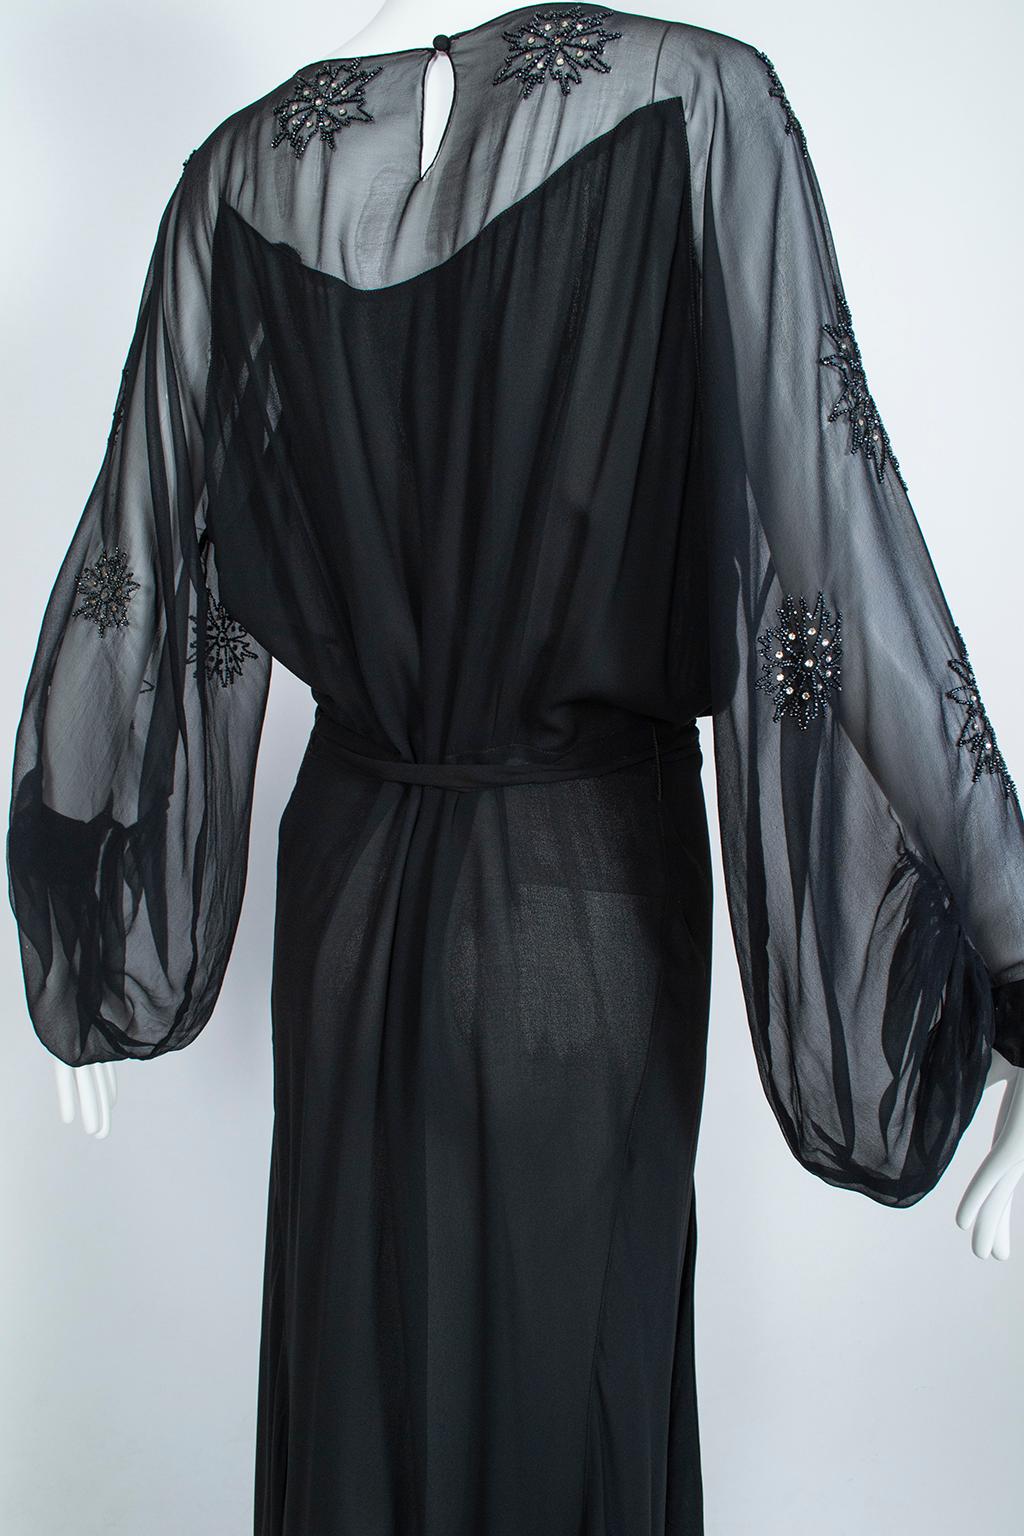 Sheer Black Crystal Bead and Crêpe Illusion Gown with Bellows Sleeves - M, 1930s 8